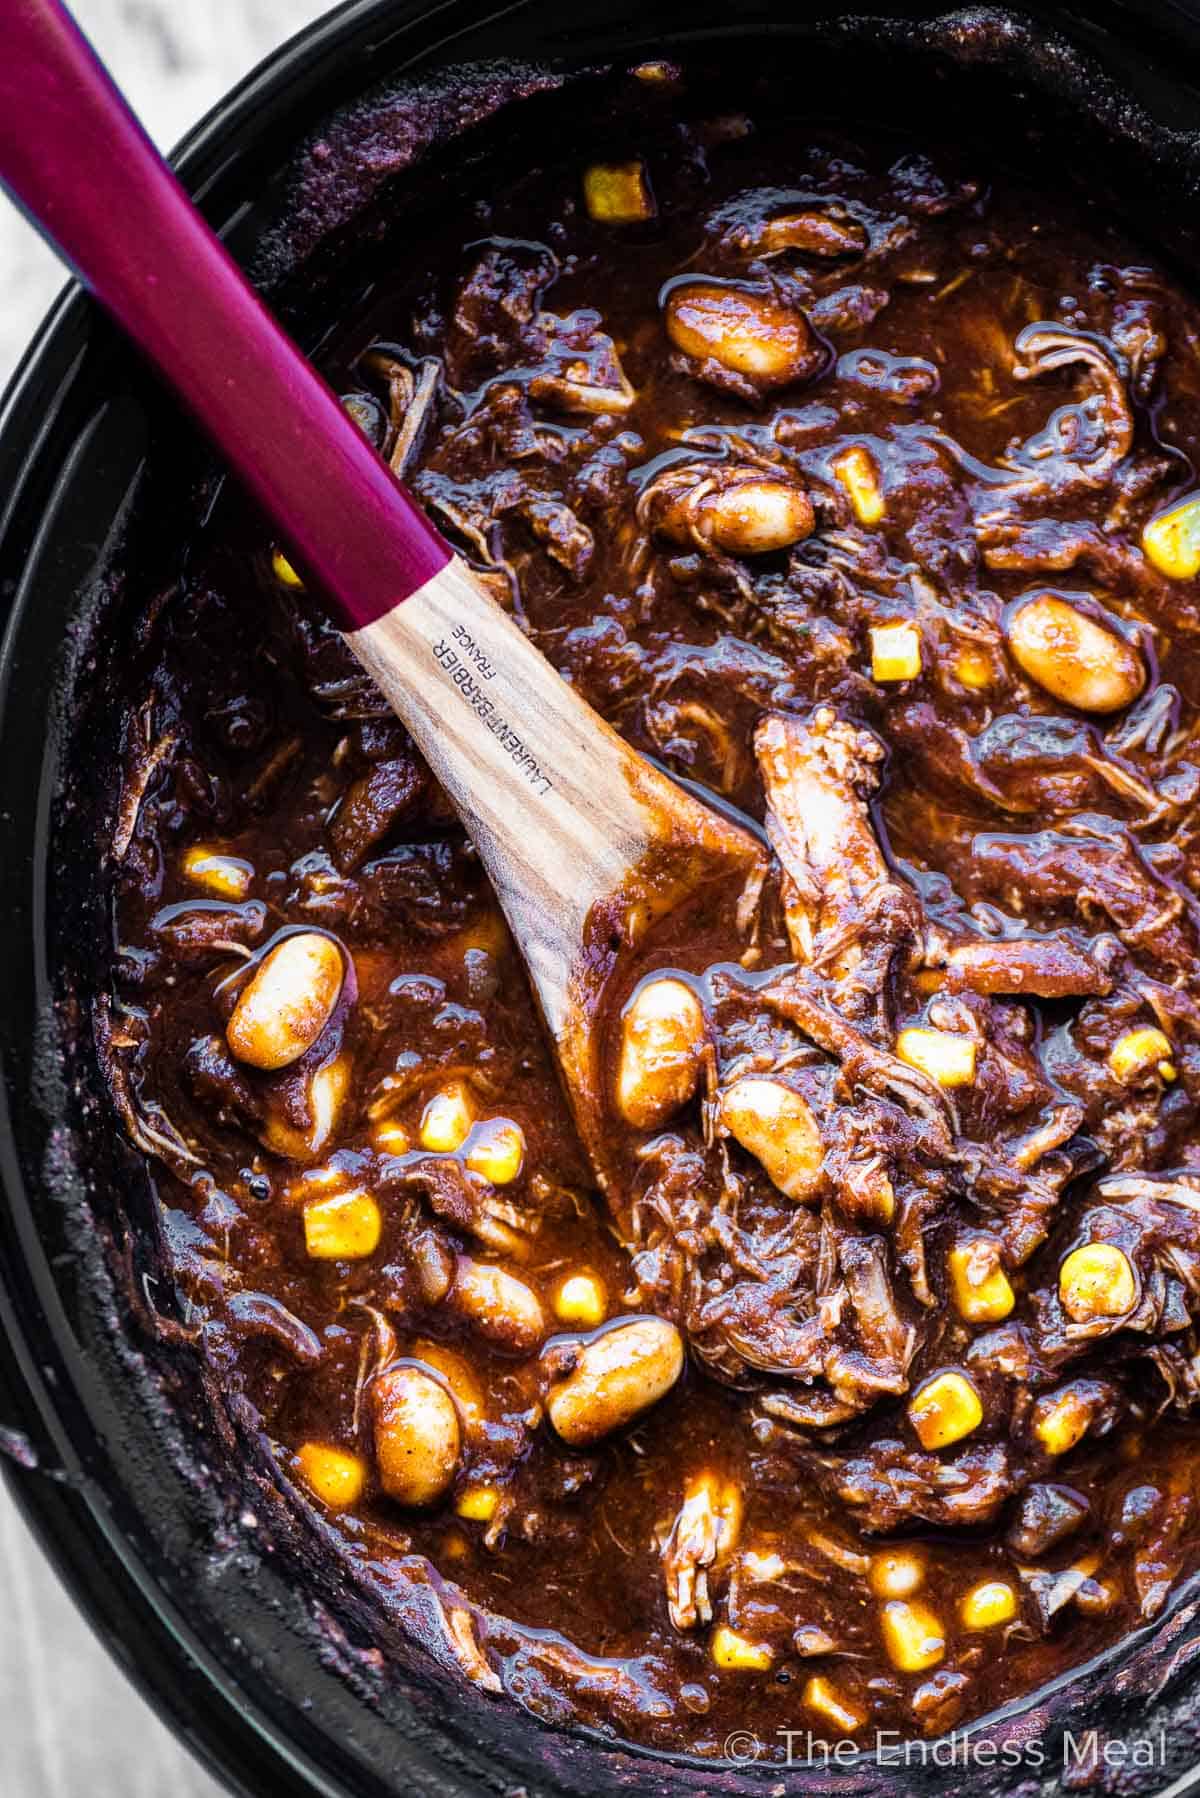 Pulled Pork Chili Super Easy Recipe The Endless Meal